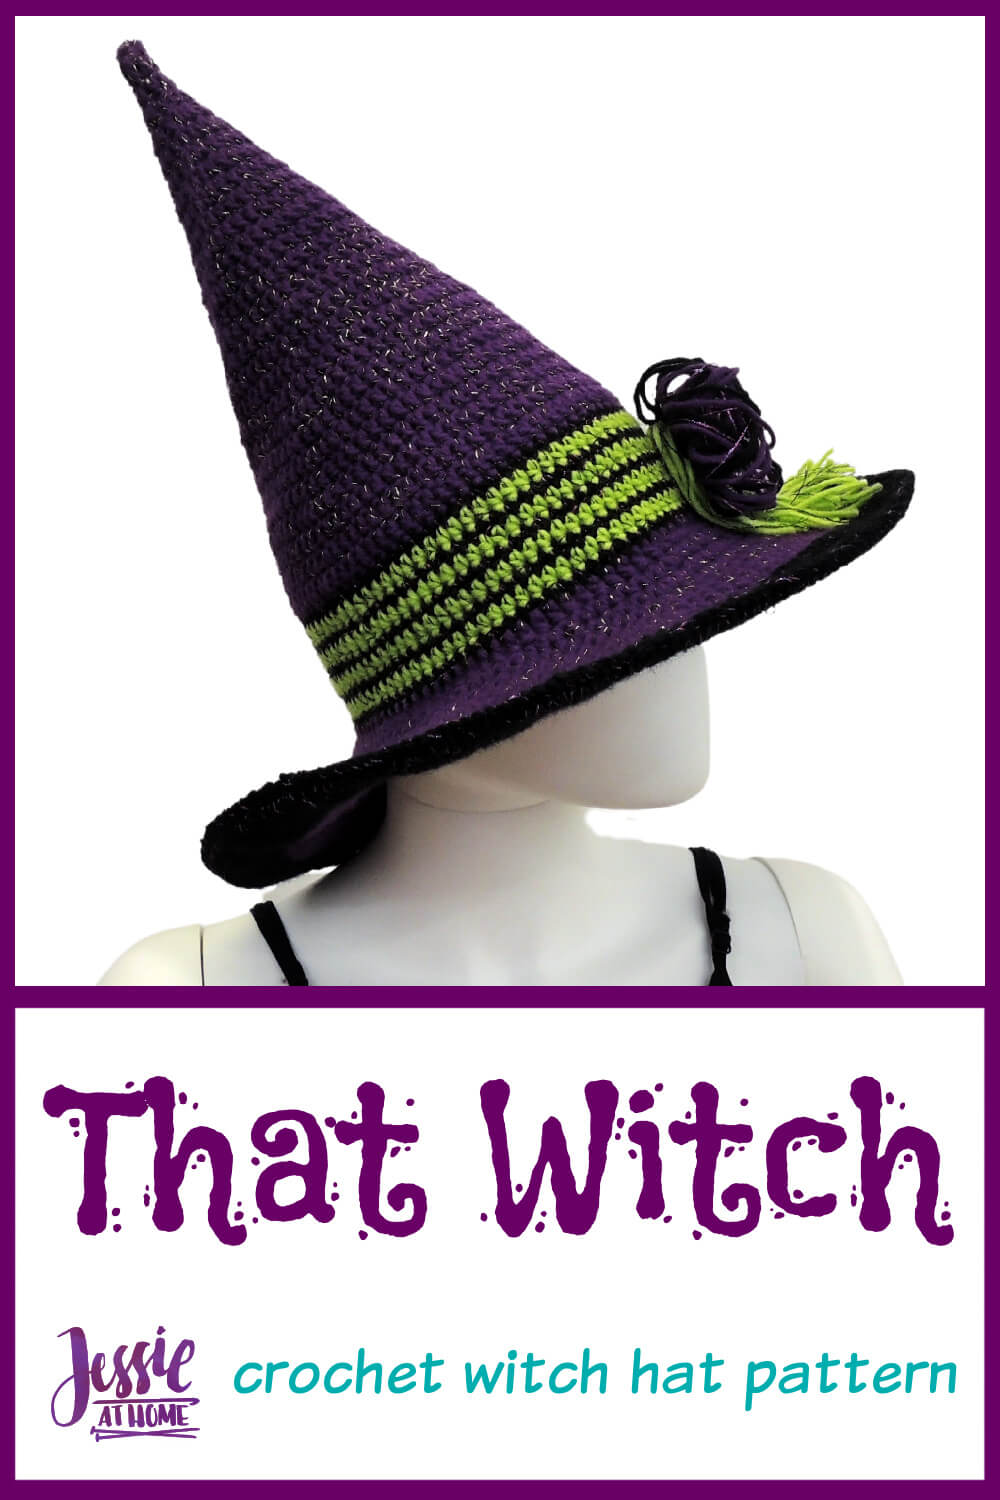 Crochet Witch Hat Free Crochet Pattern for the Whole Family